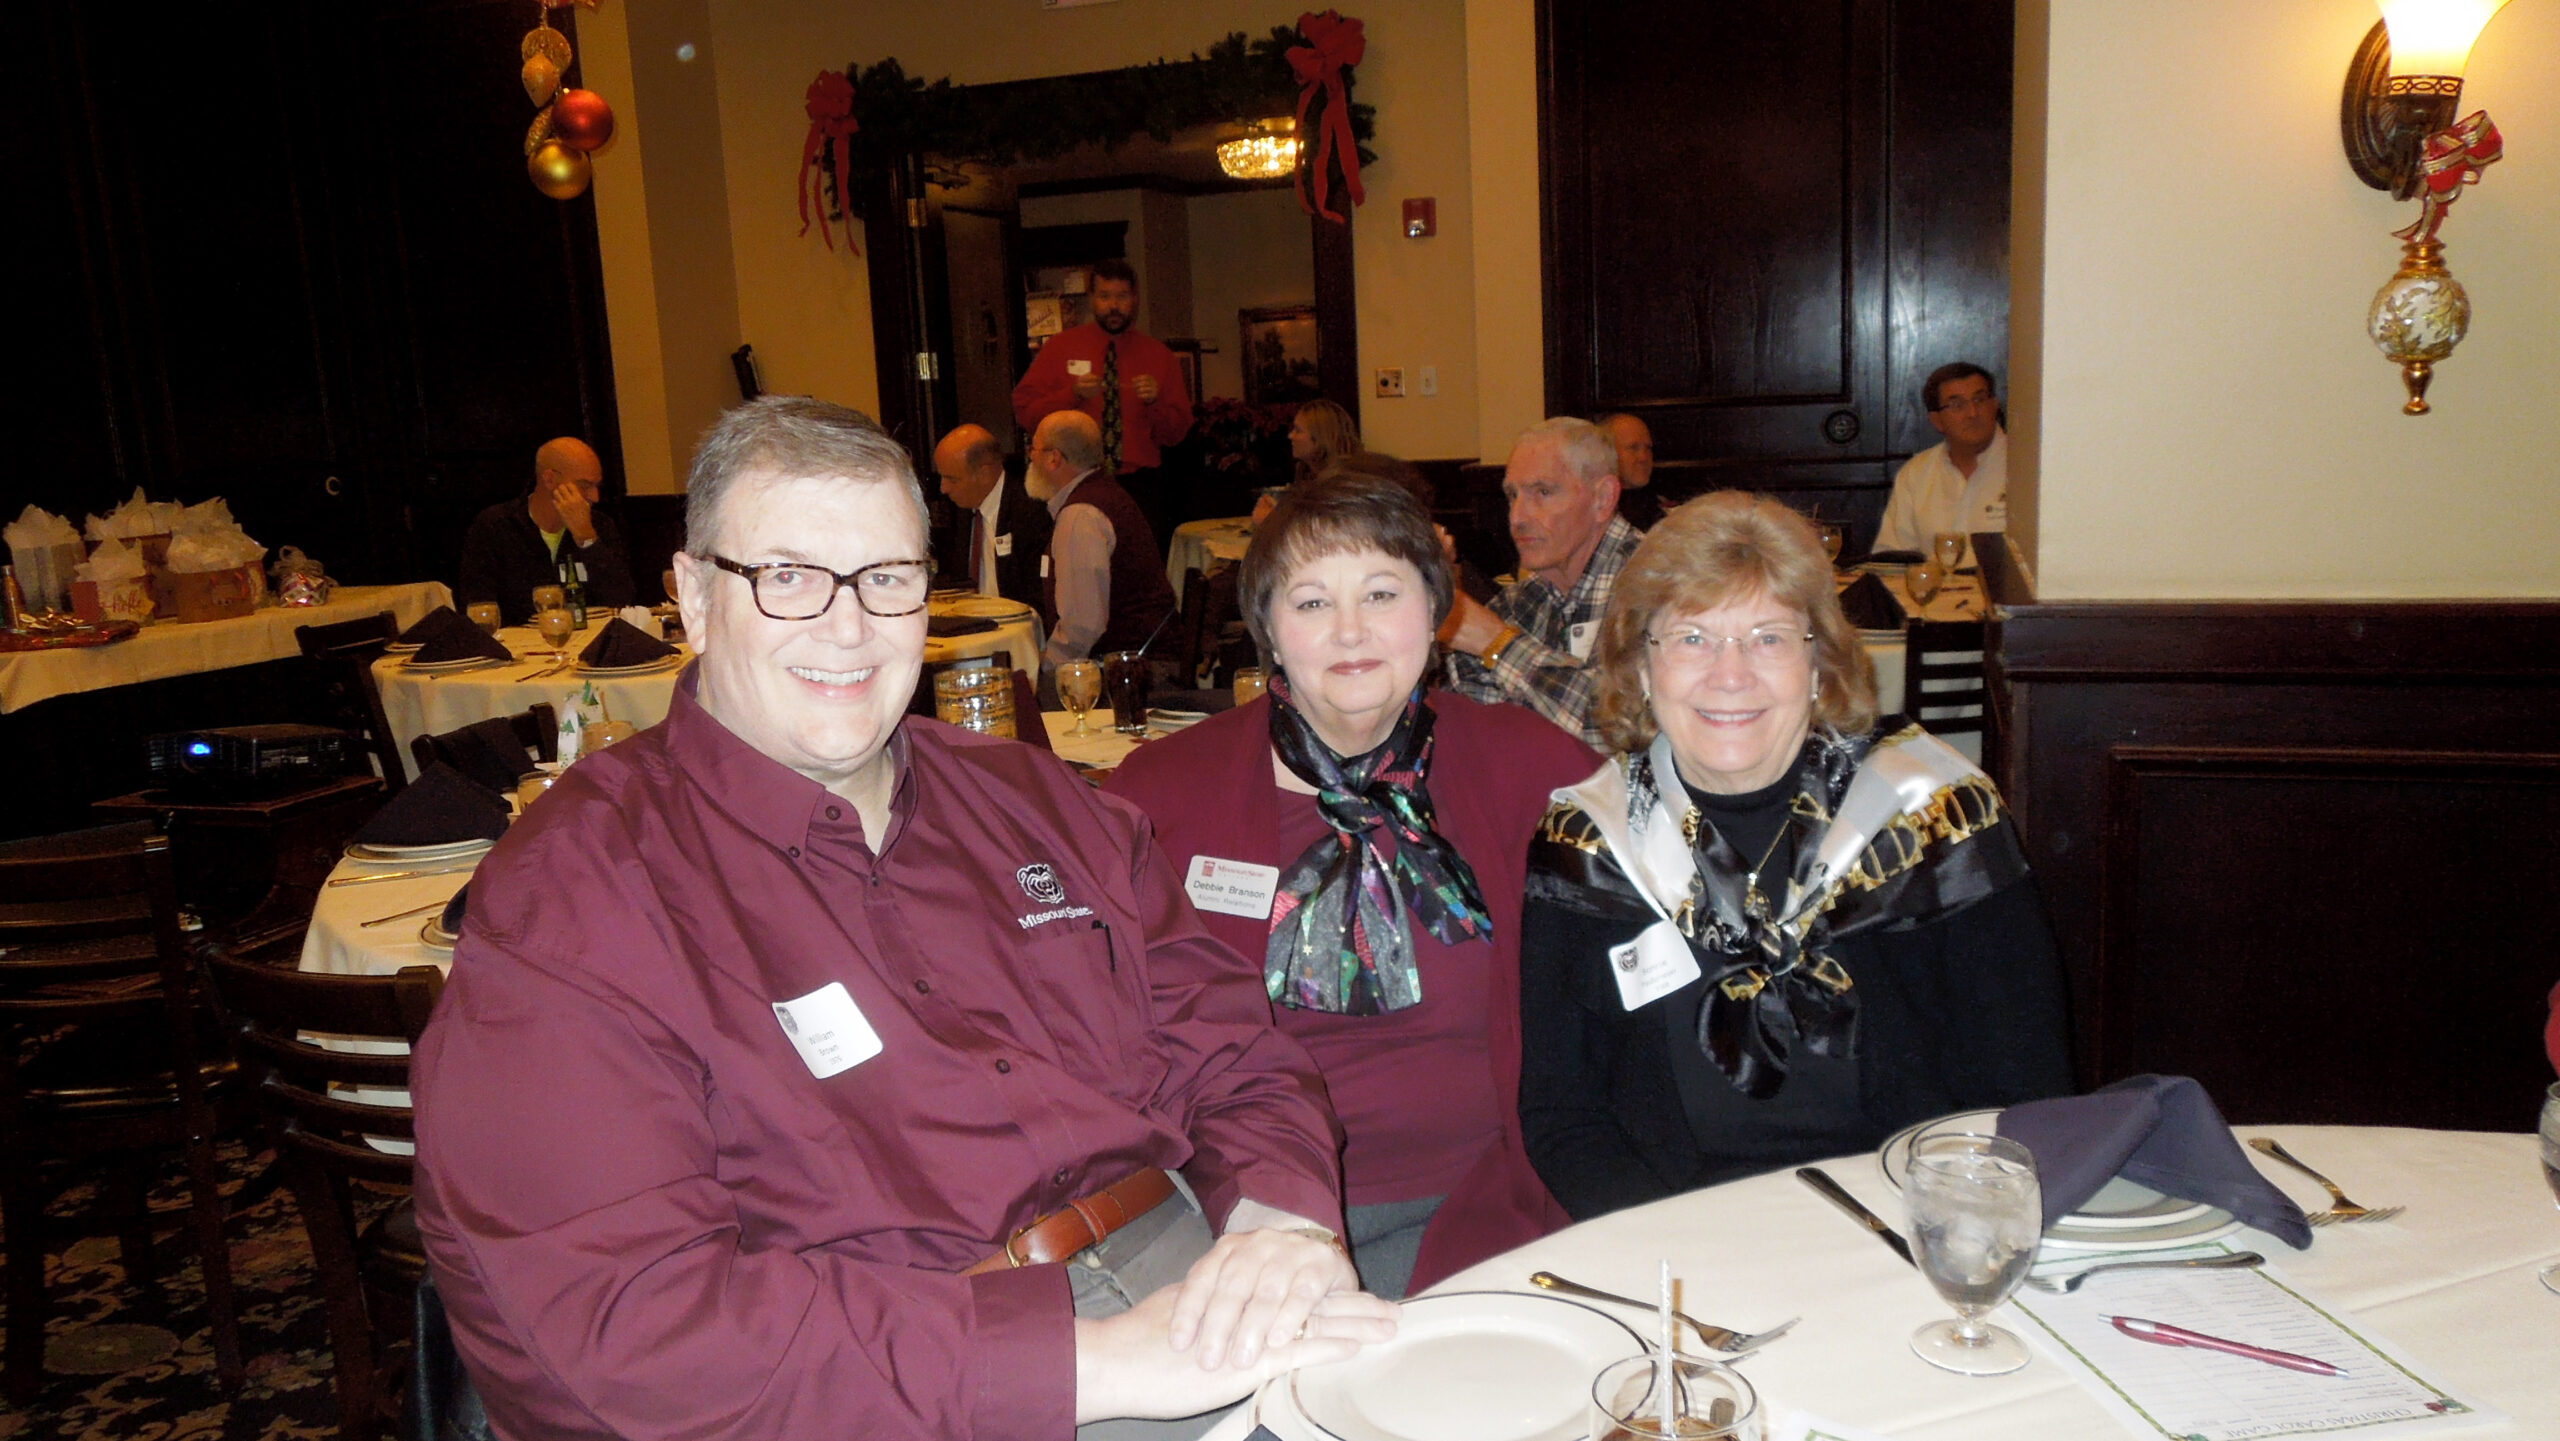 Alumni at St.Louis MarooNation holiday party